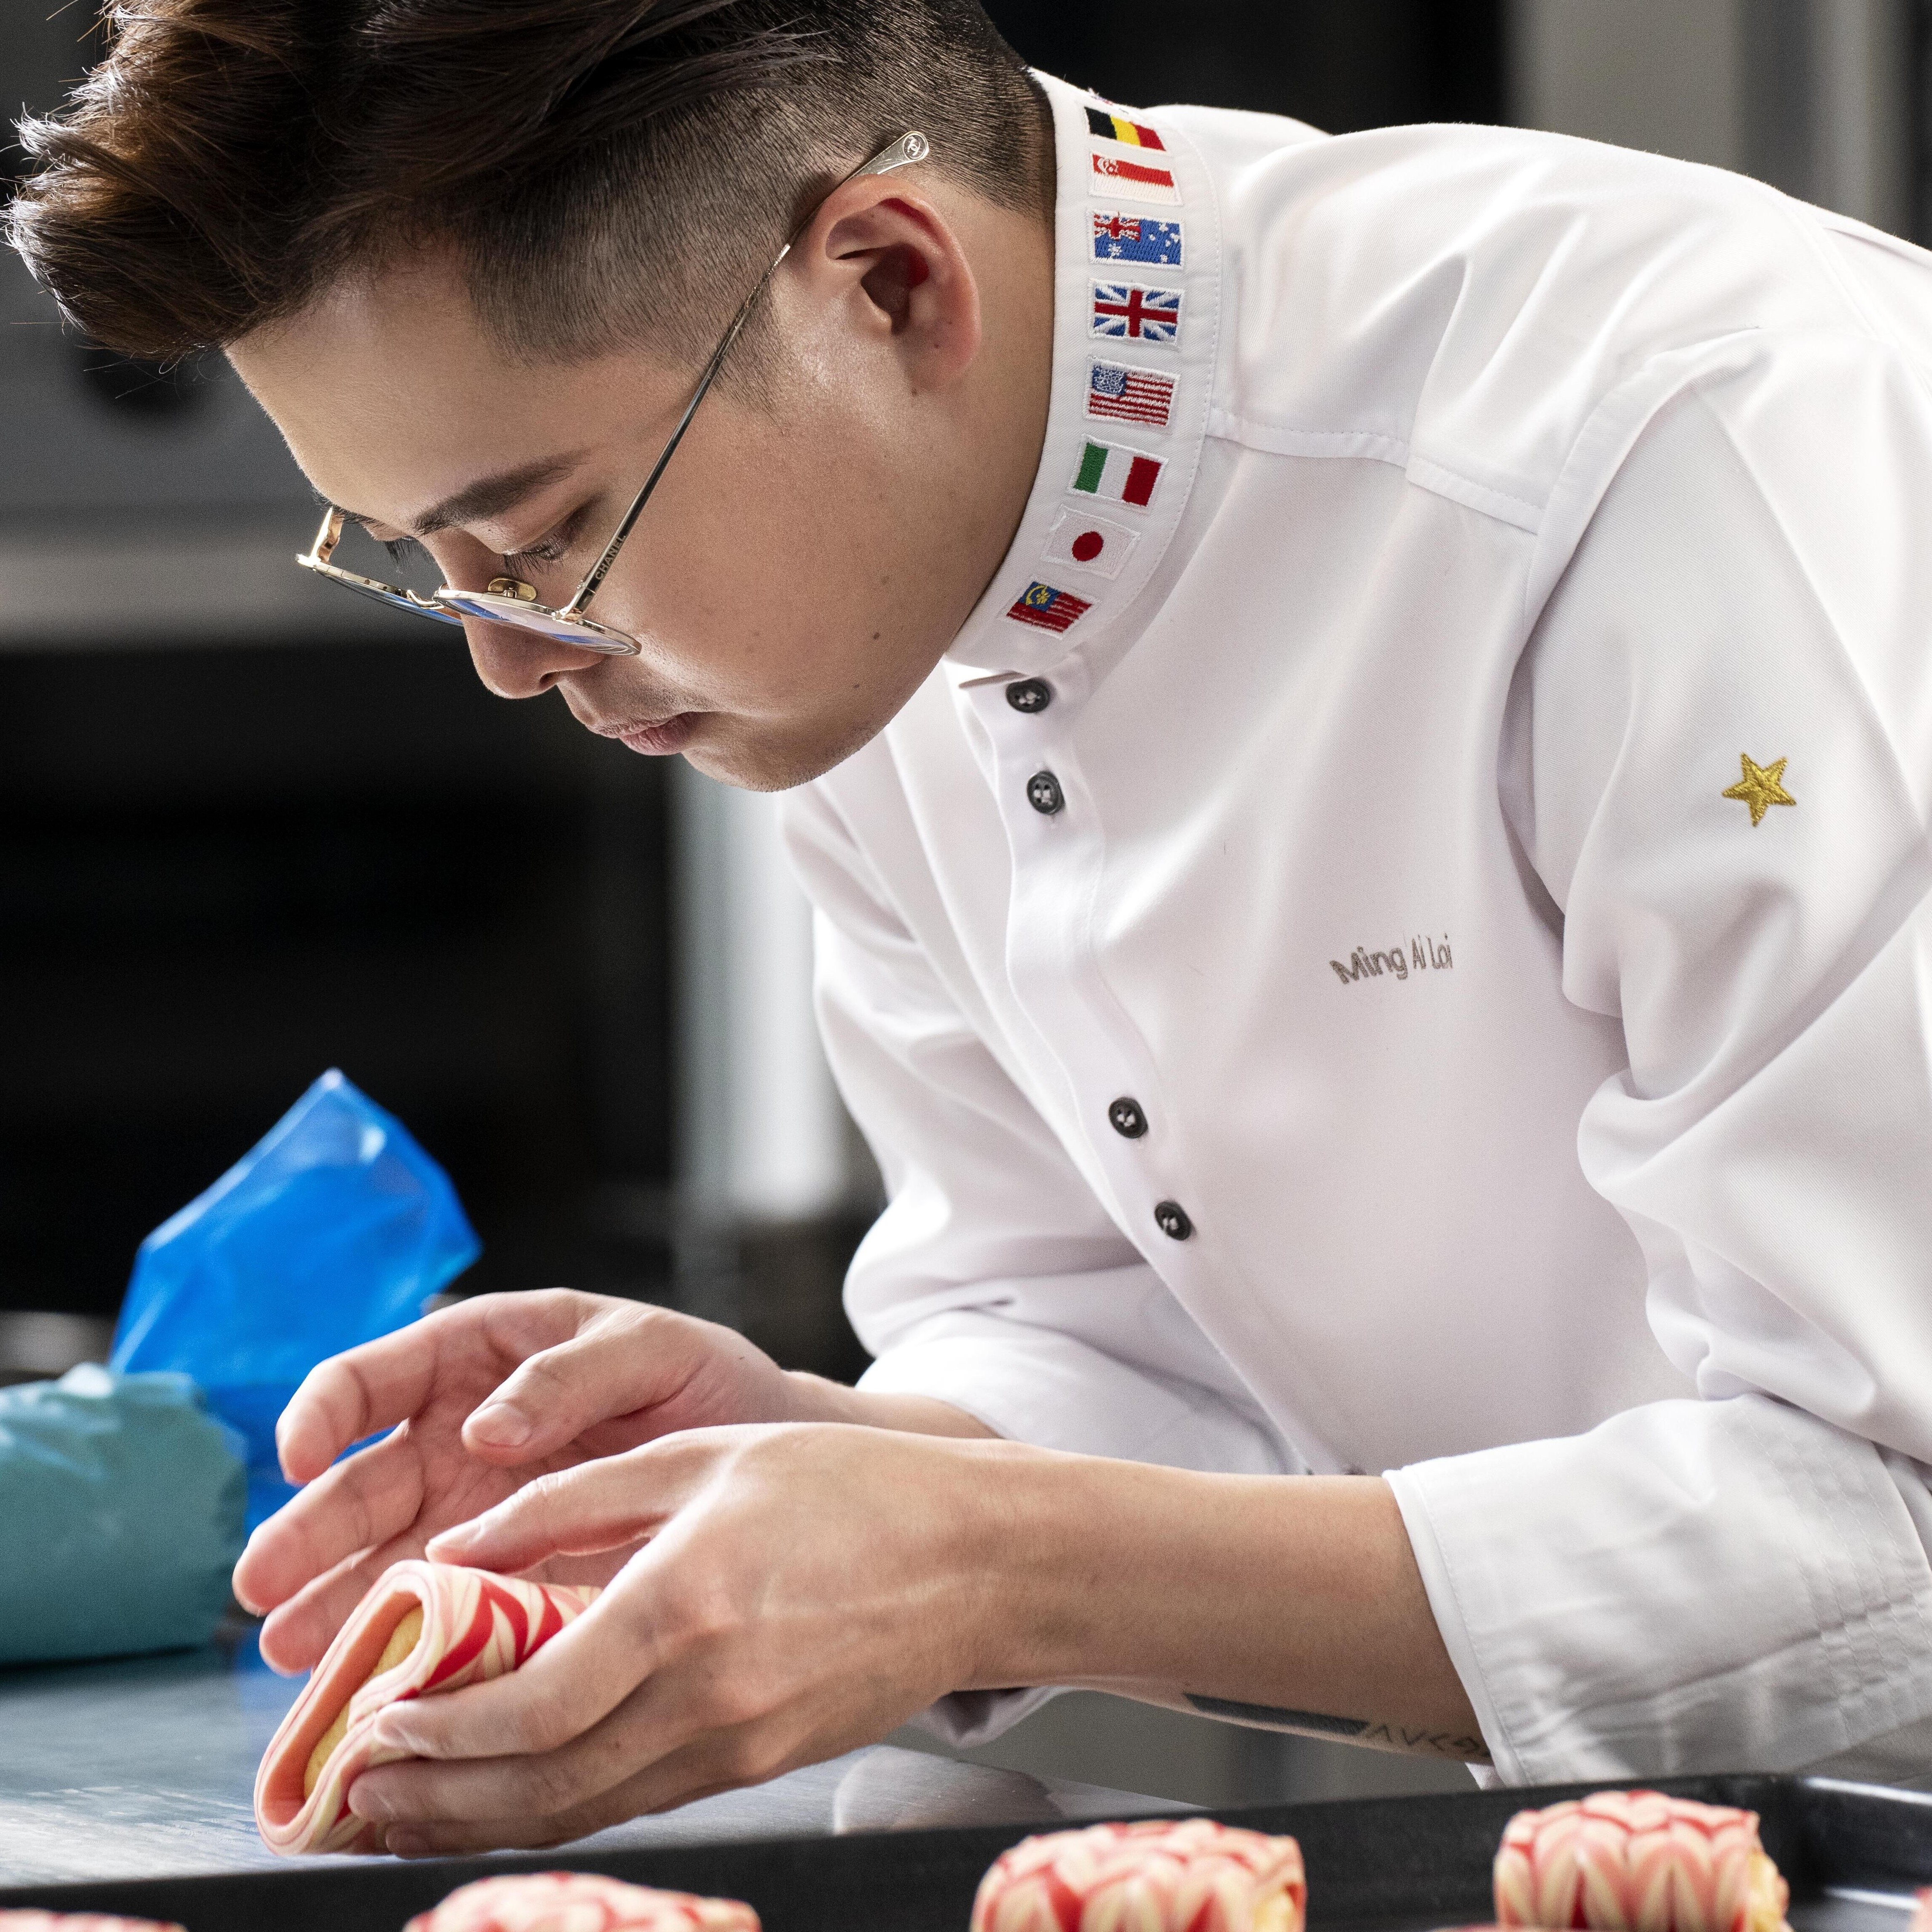 ‘My mission is to make French patisserie loved among a broad Asian clientele.’